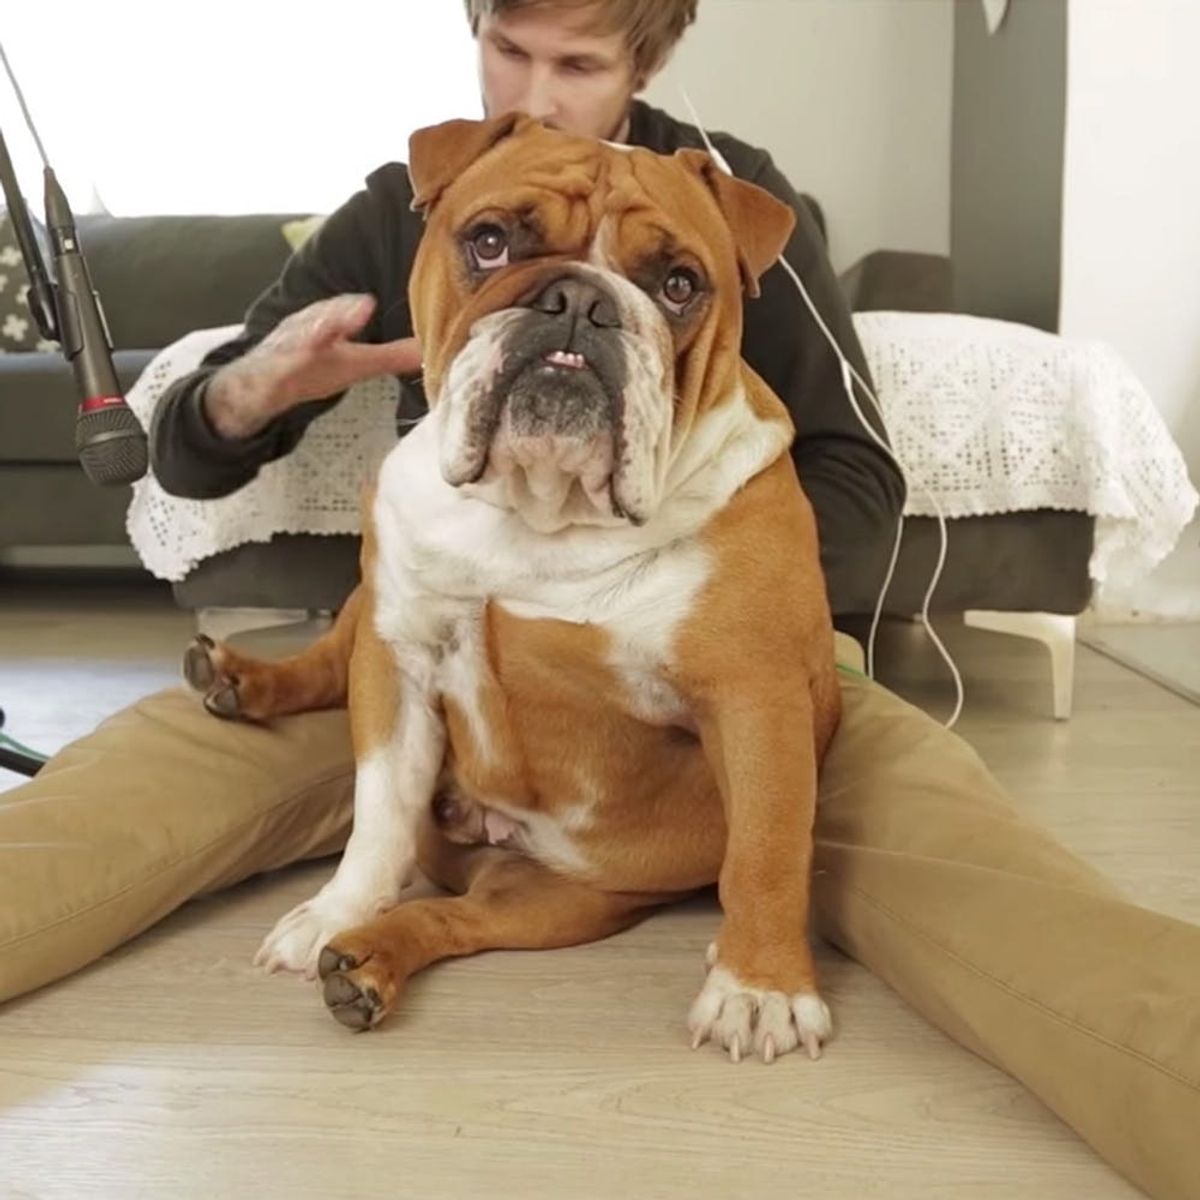 This Musician Used His Bulldog to Create the Funniest Song Ever